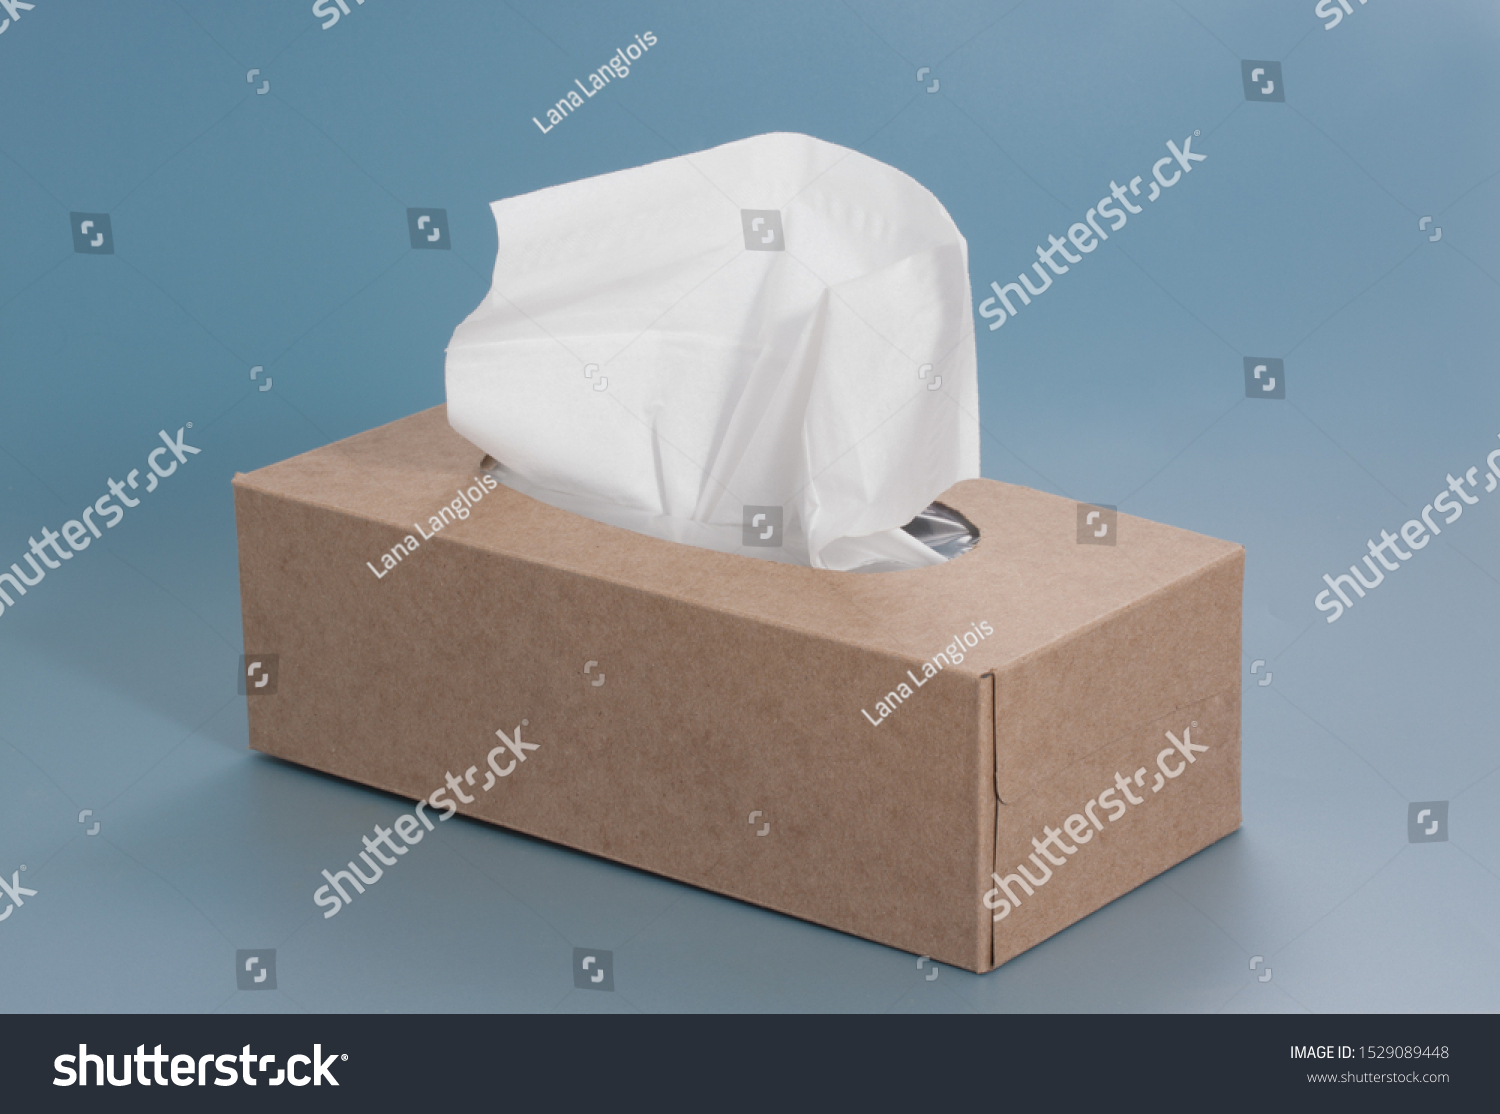 Nice brown tissue paper box on blue background #1529089448